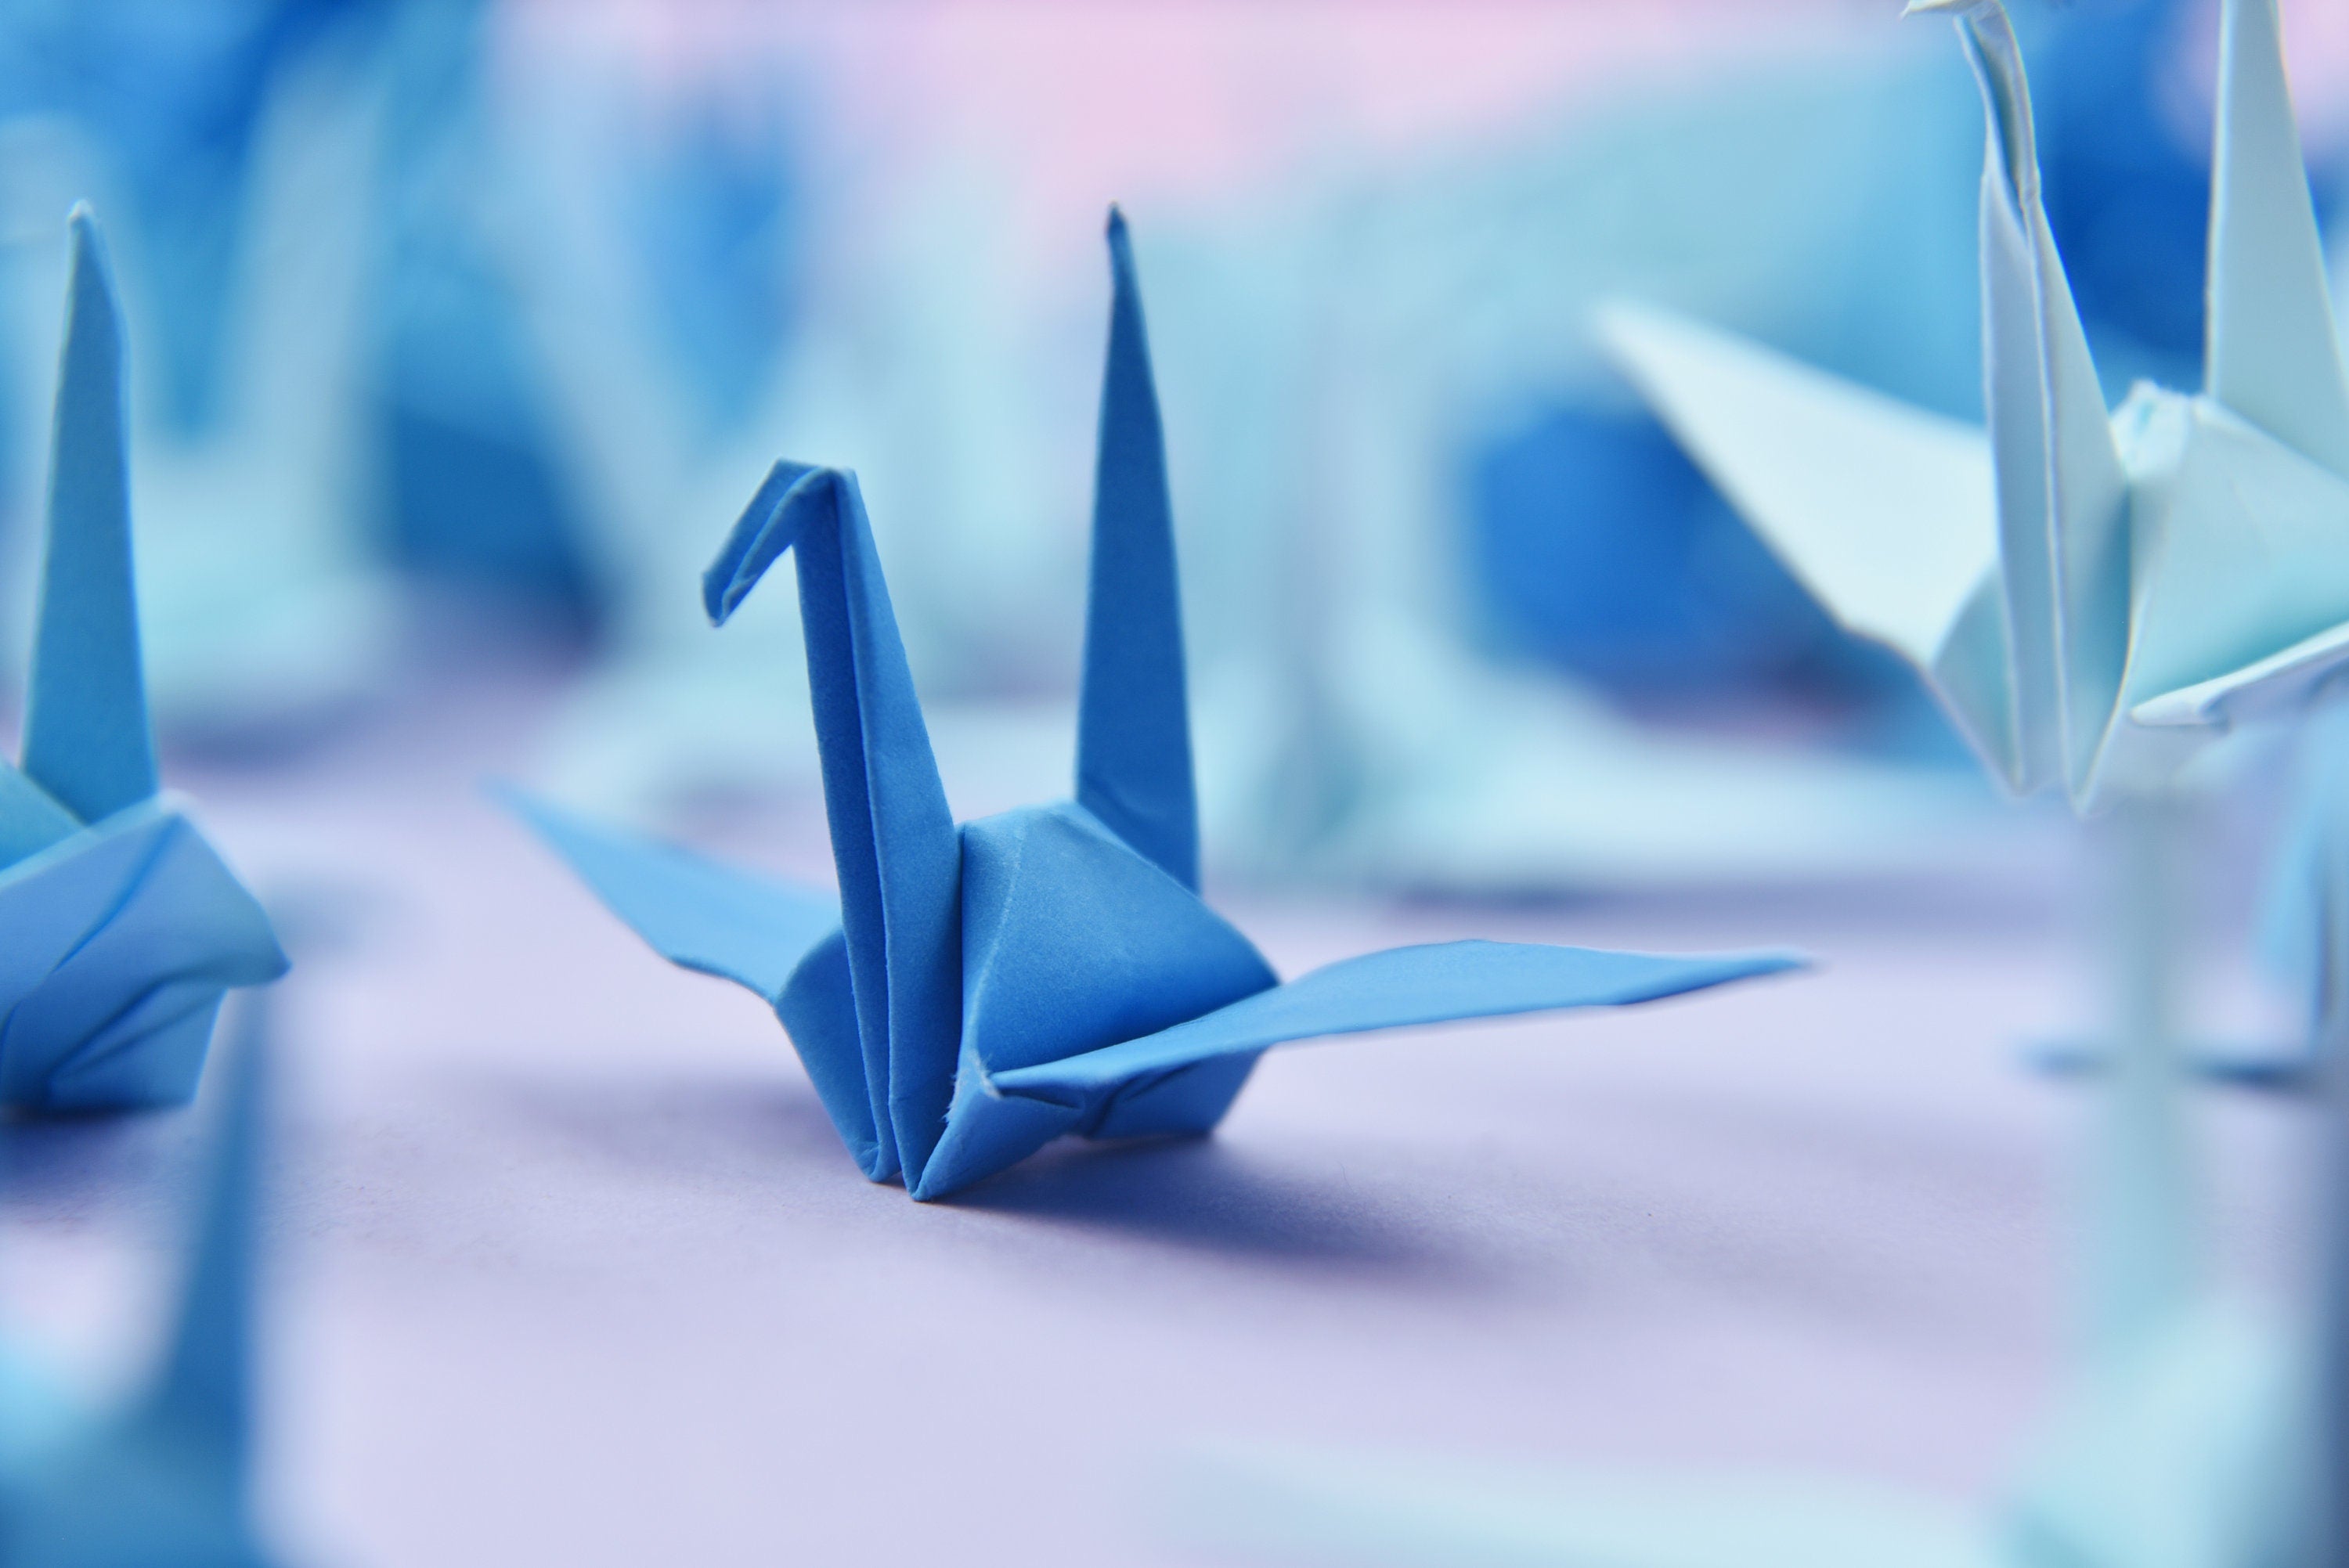 1000 Blue Shade Origami Paper Cranes 3x3 inches 7.5 cm for Wedding Decor, Anniversary Gift, Valentine's, Backdrop